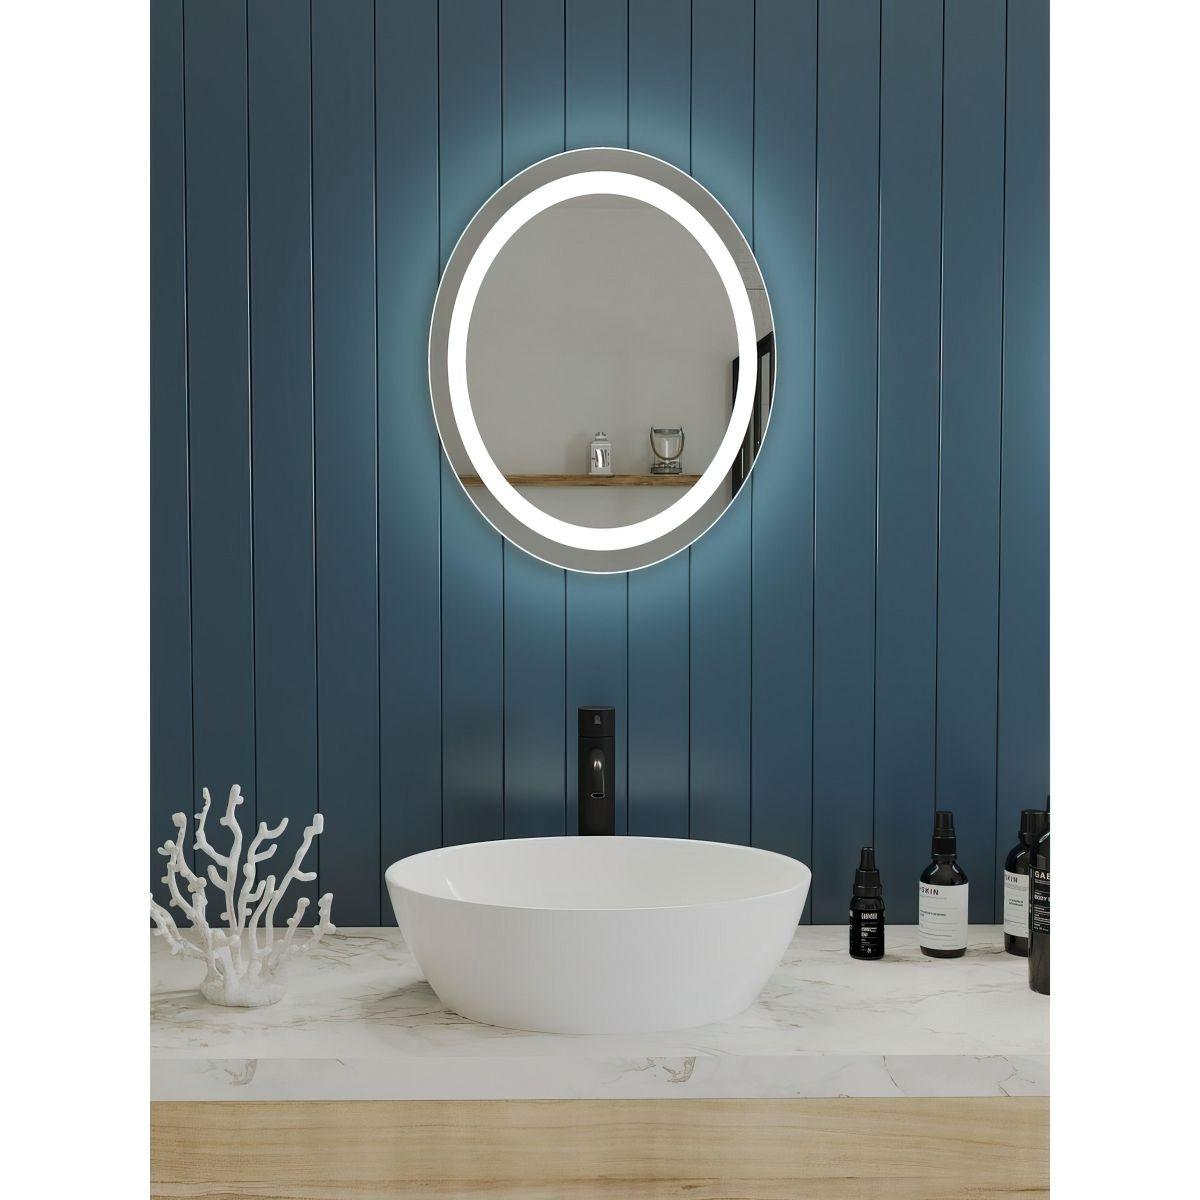 Captarent 22 In. X 28 In. White LED Wall Mirror